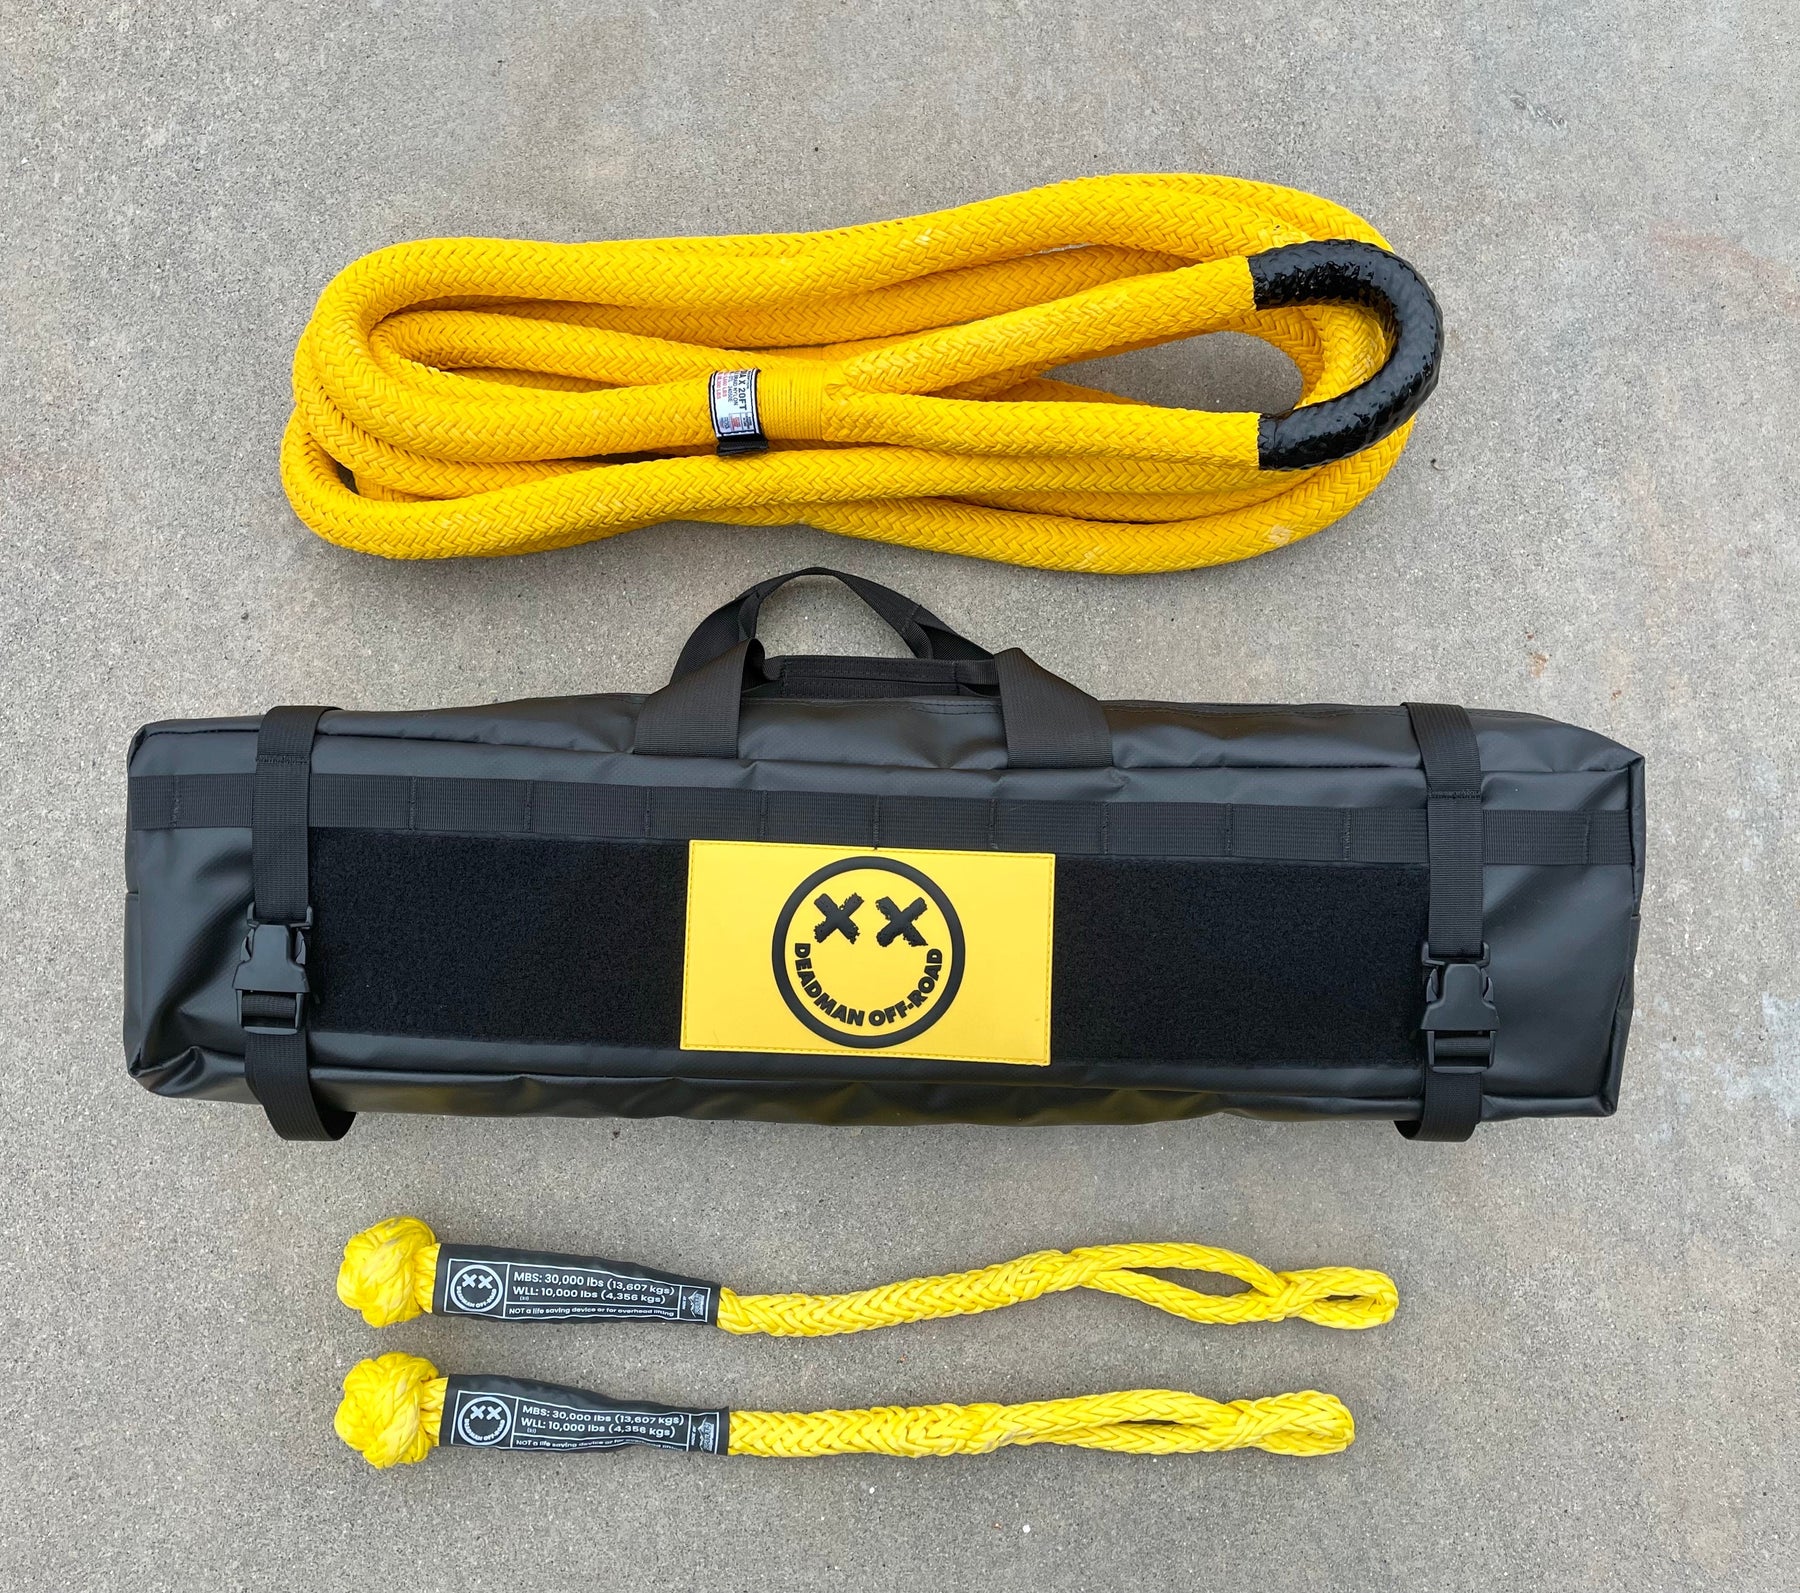 Stretchy Band Kits 7/8" x 20' - Original Shackle - $299.97 Recovery Gear, Camping Gear Deadman Off-Road- Adventure Imports